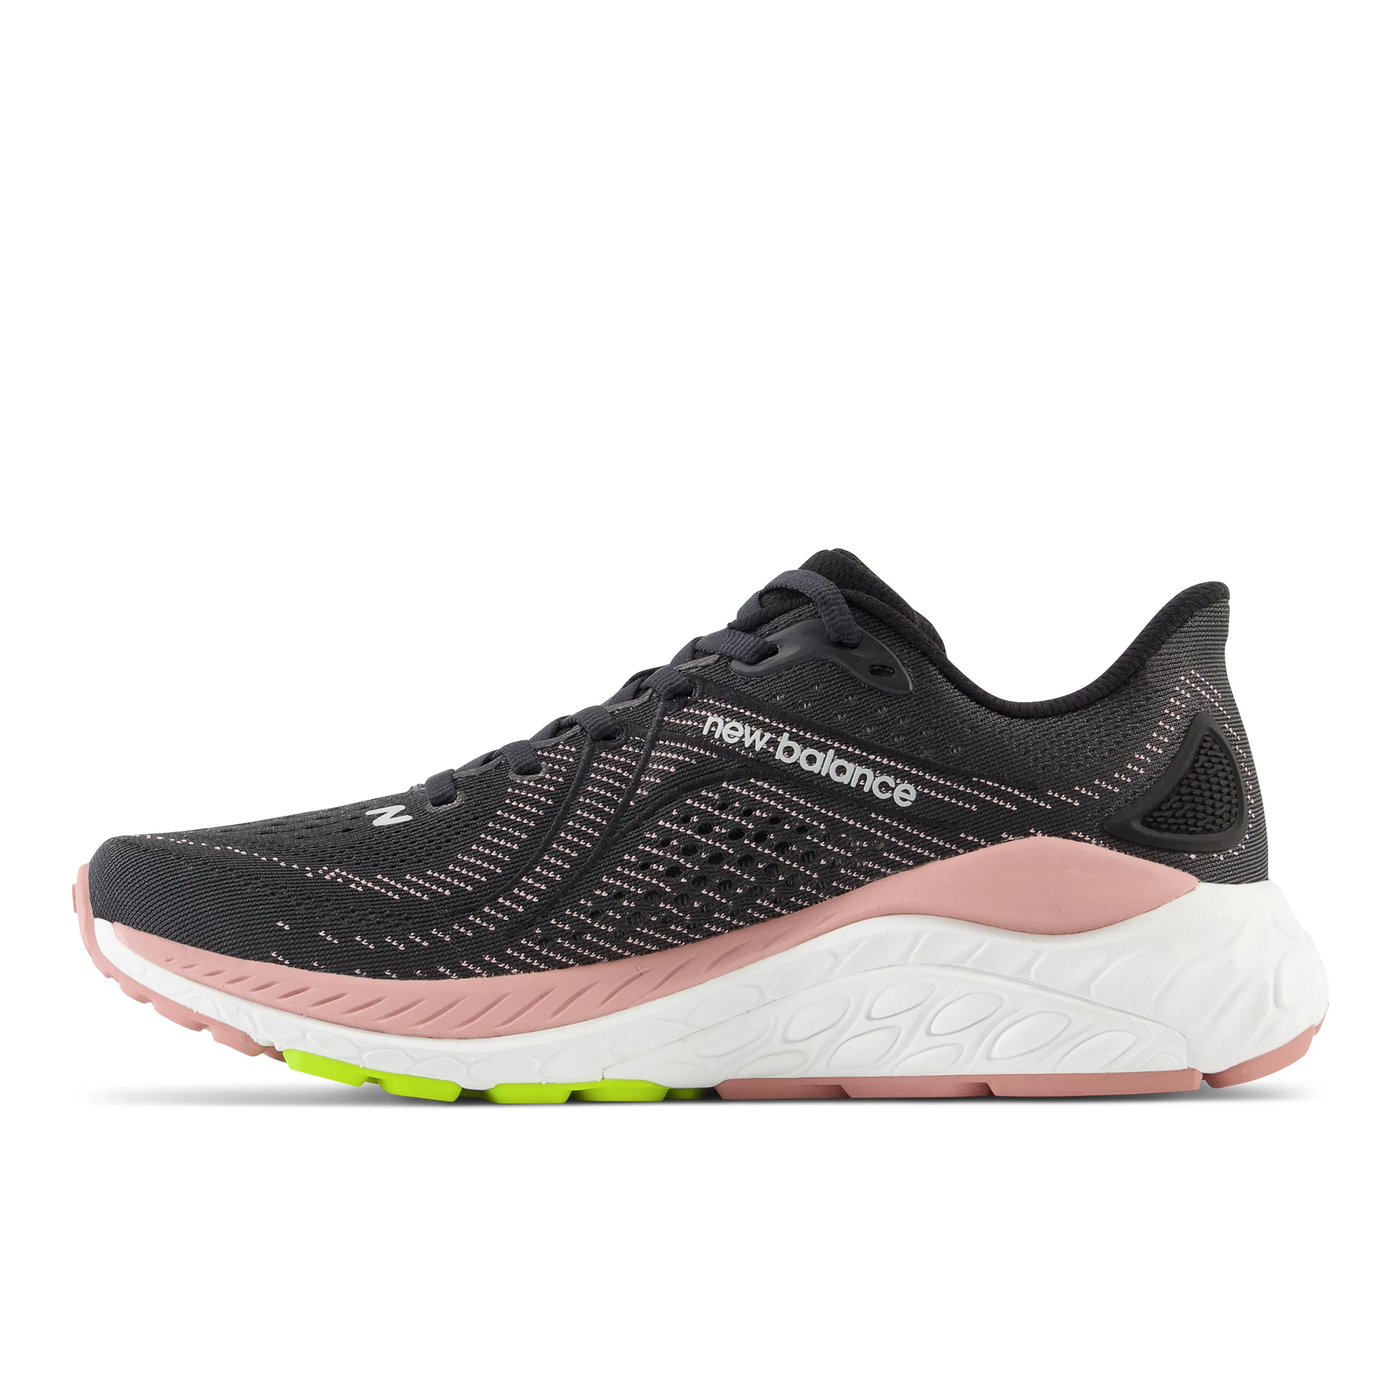 New Balance Womens 860v13 Wide - D Width - Black/Pink Moon - Stability